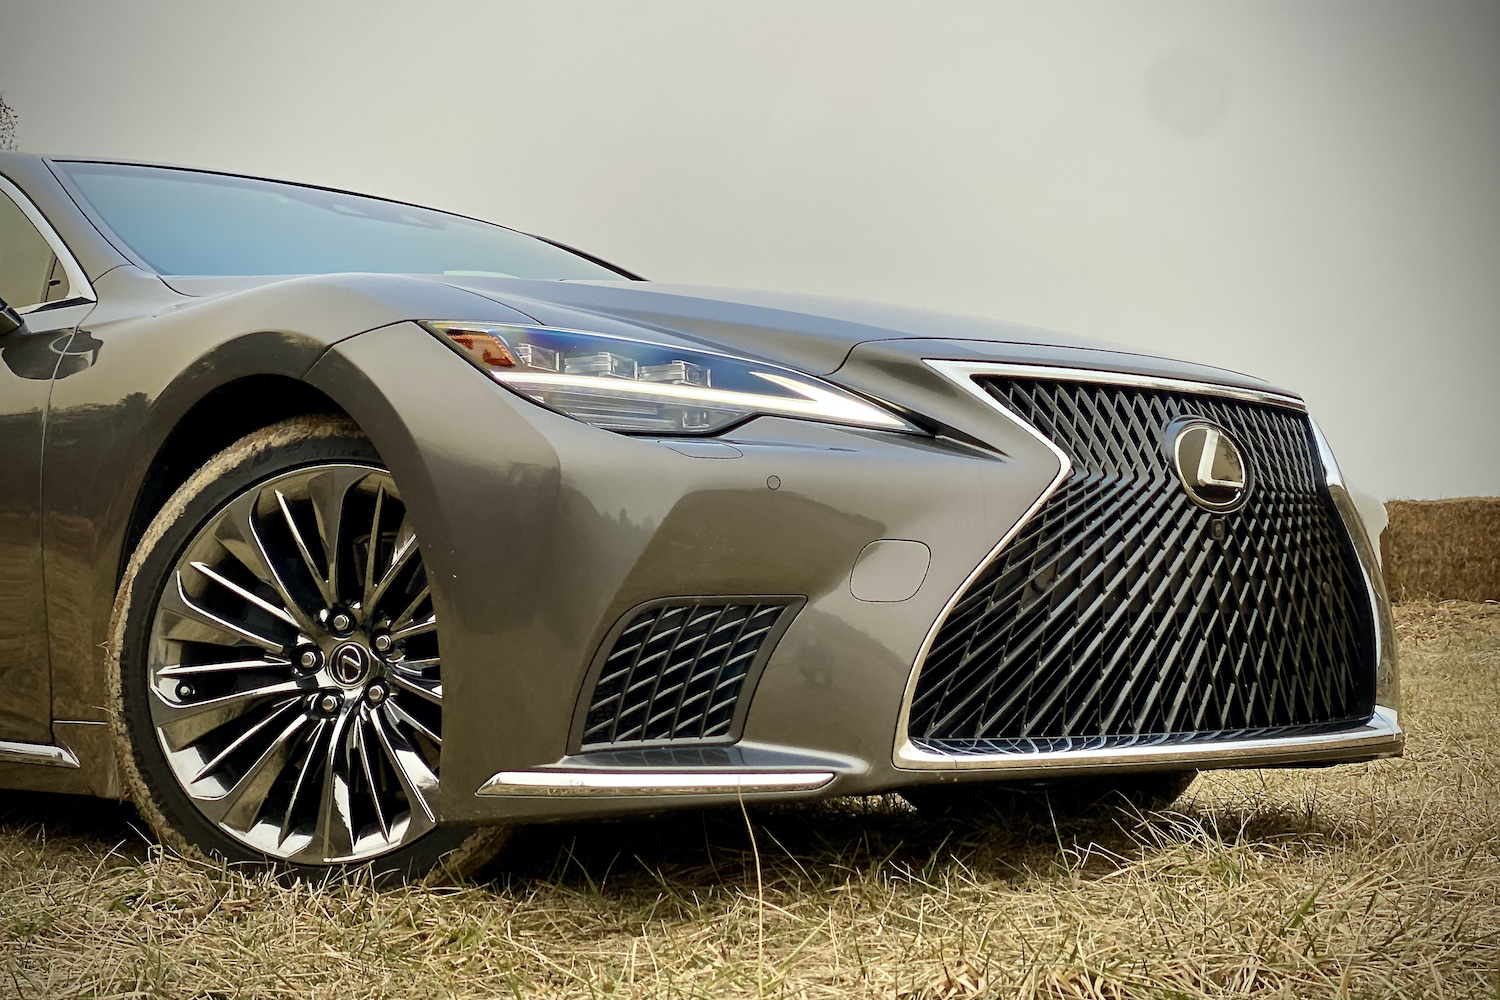 A close-up of the 2021 Lexus LS500's front end from passenger's side on a grassy field.